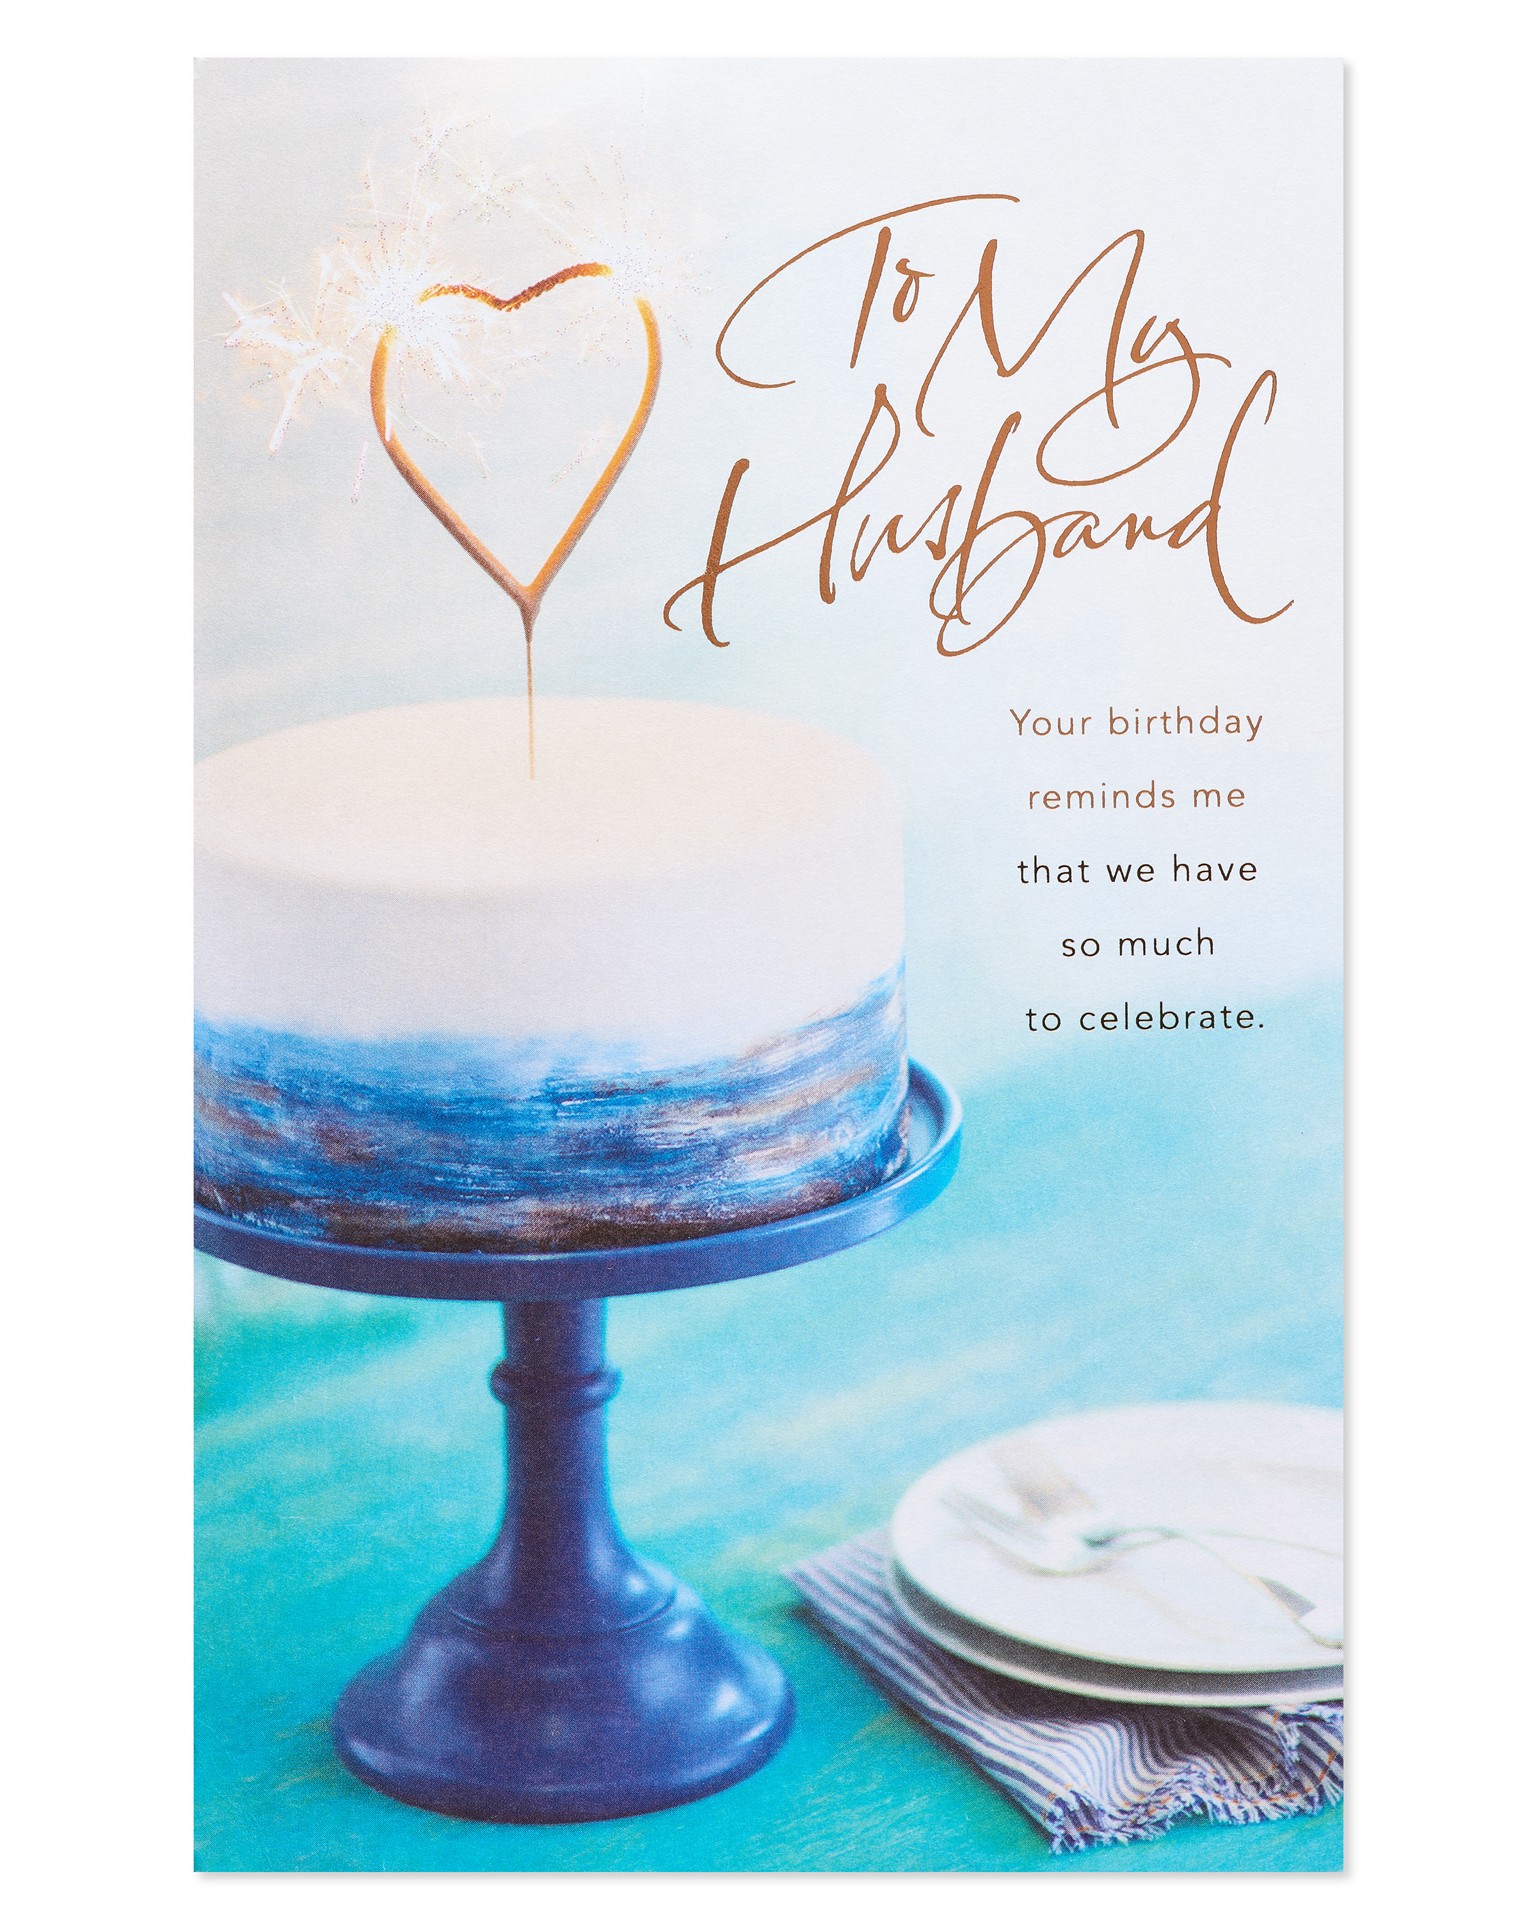 slide 5 of 5, American Greetings Celebrate the #1 man in your life with this sincere and loving card from American Greetings. Ths photo card features a cake with heart-shaped candle in blue tones and copper lettering. The simple yet elegant desgn is just as beautiful as the words themselves. Say “Happy birthday, with love” in a special way this year., 1 ct